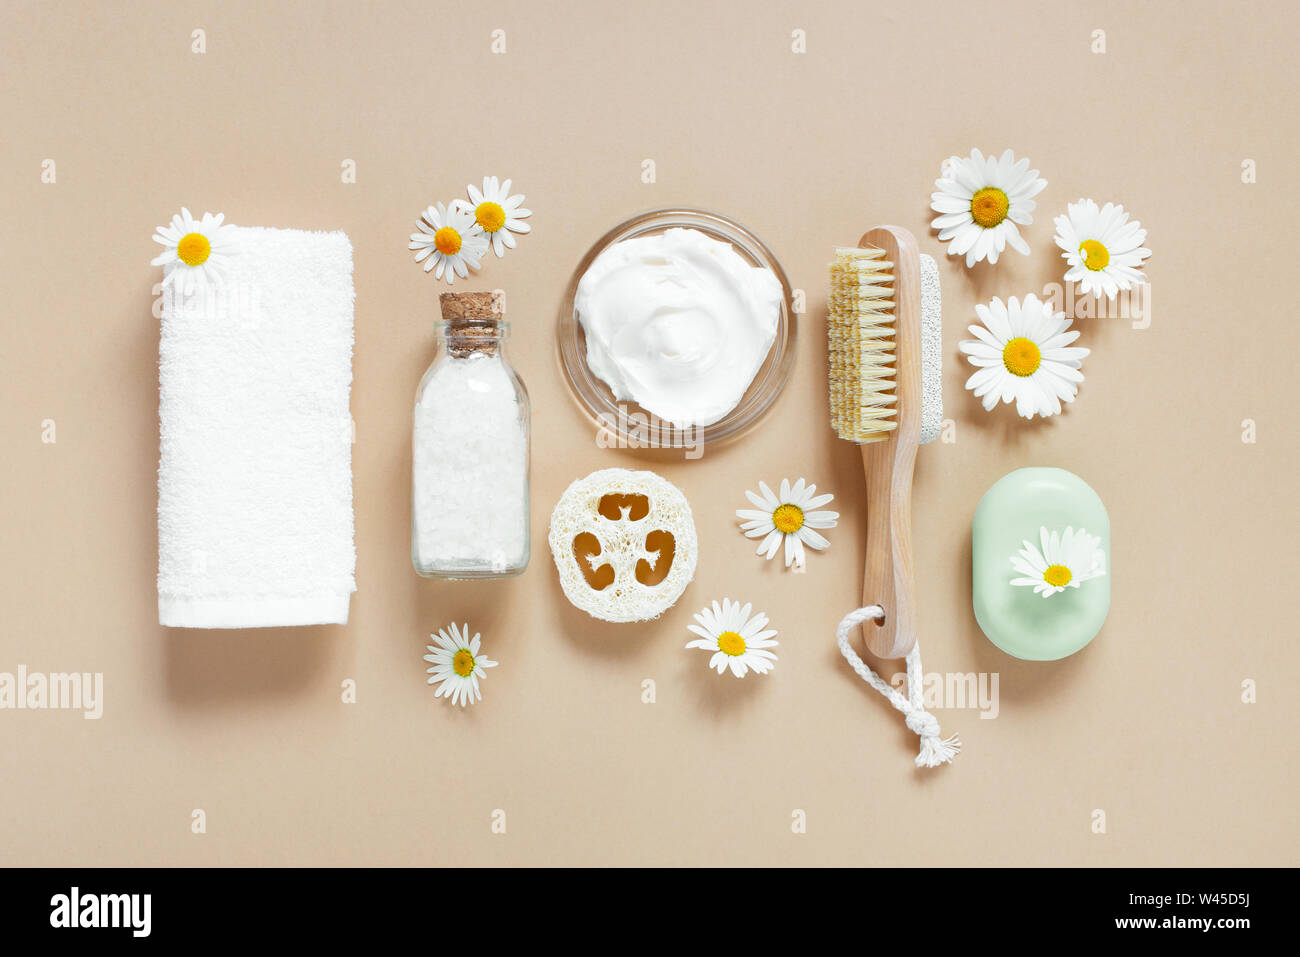 Organic body care products, concept of healthy life stile, flat lay composition Stock Photo